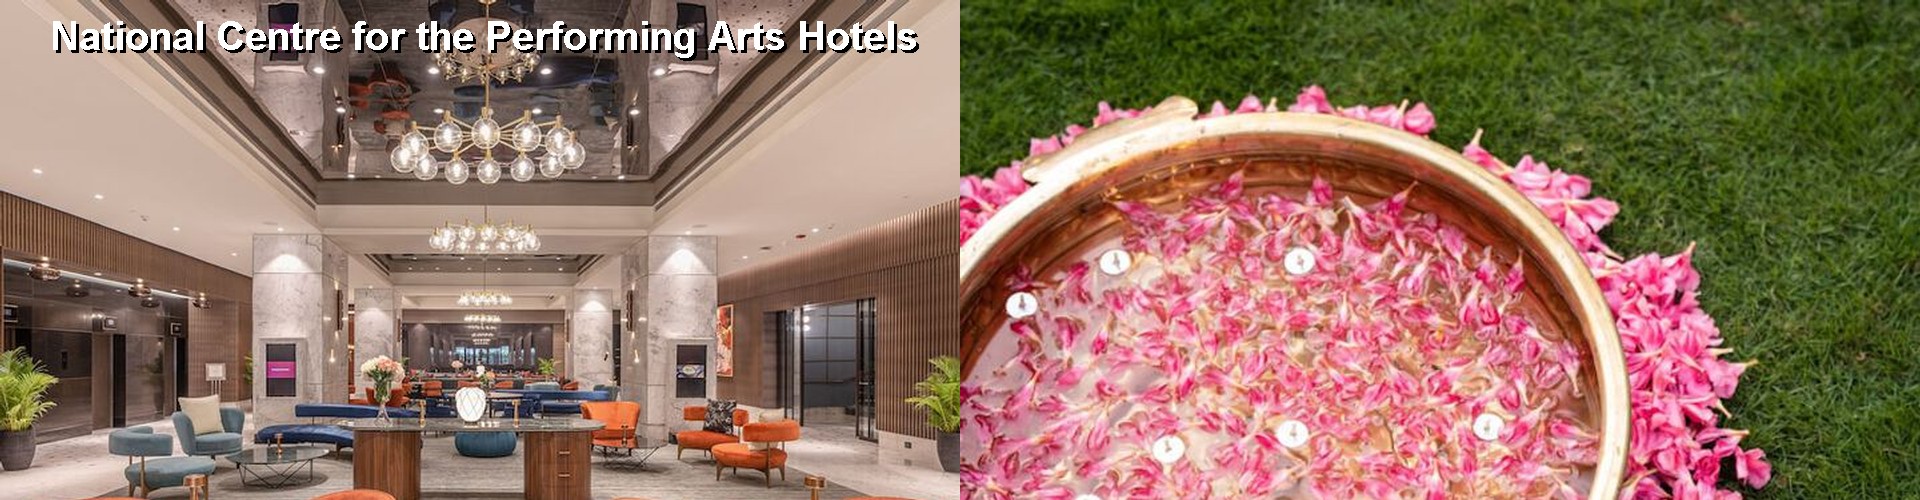 5 Best Hotels near National Centre for the Performing Arts